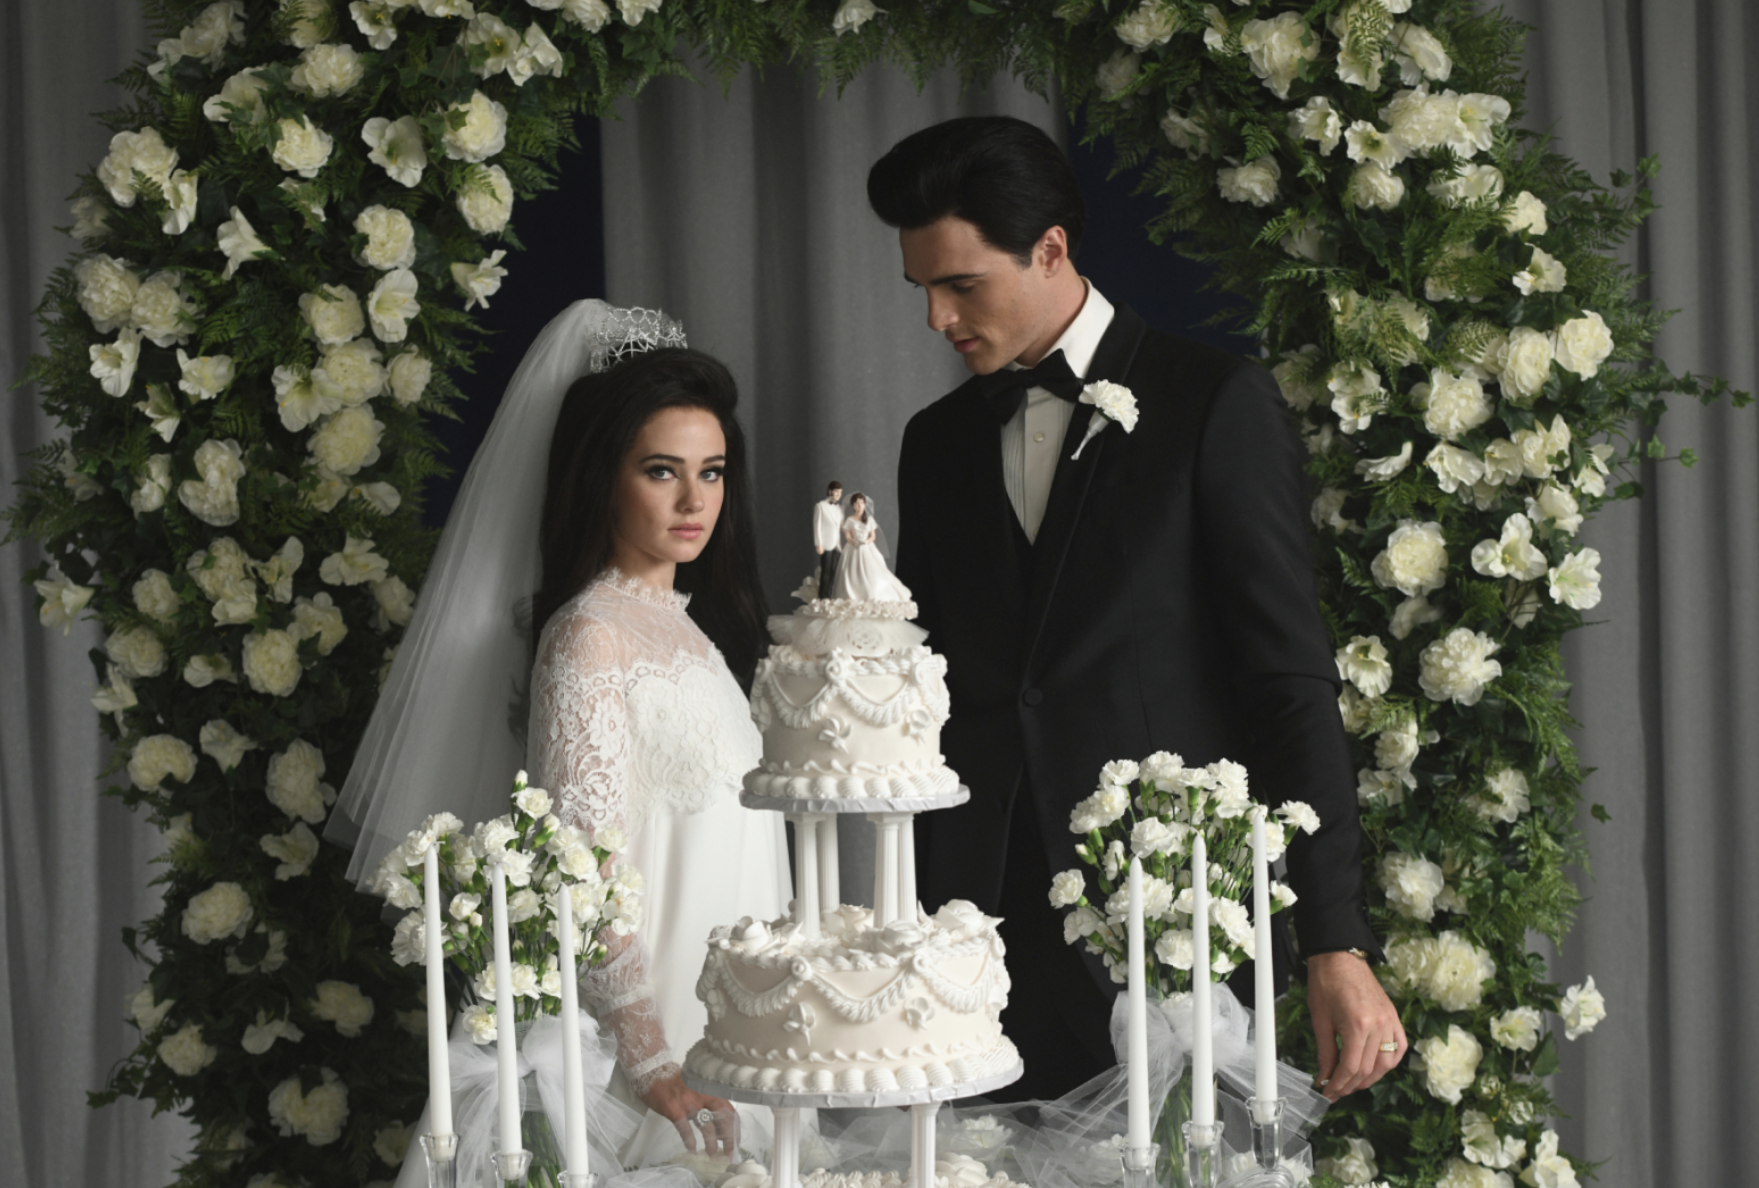 Jacob Elordi (Elvis) and Cailee Spaeny (Priscilla) stand behind a wedding cake.